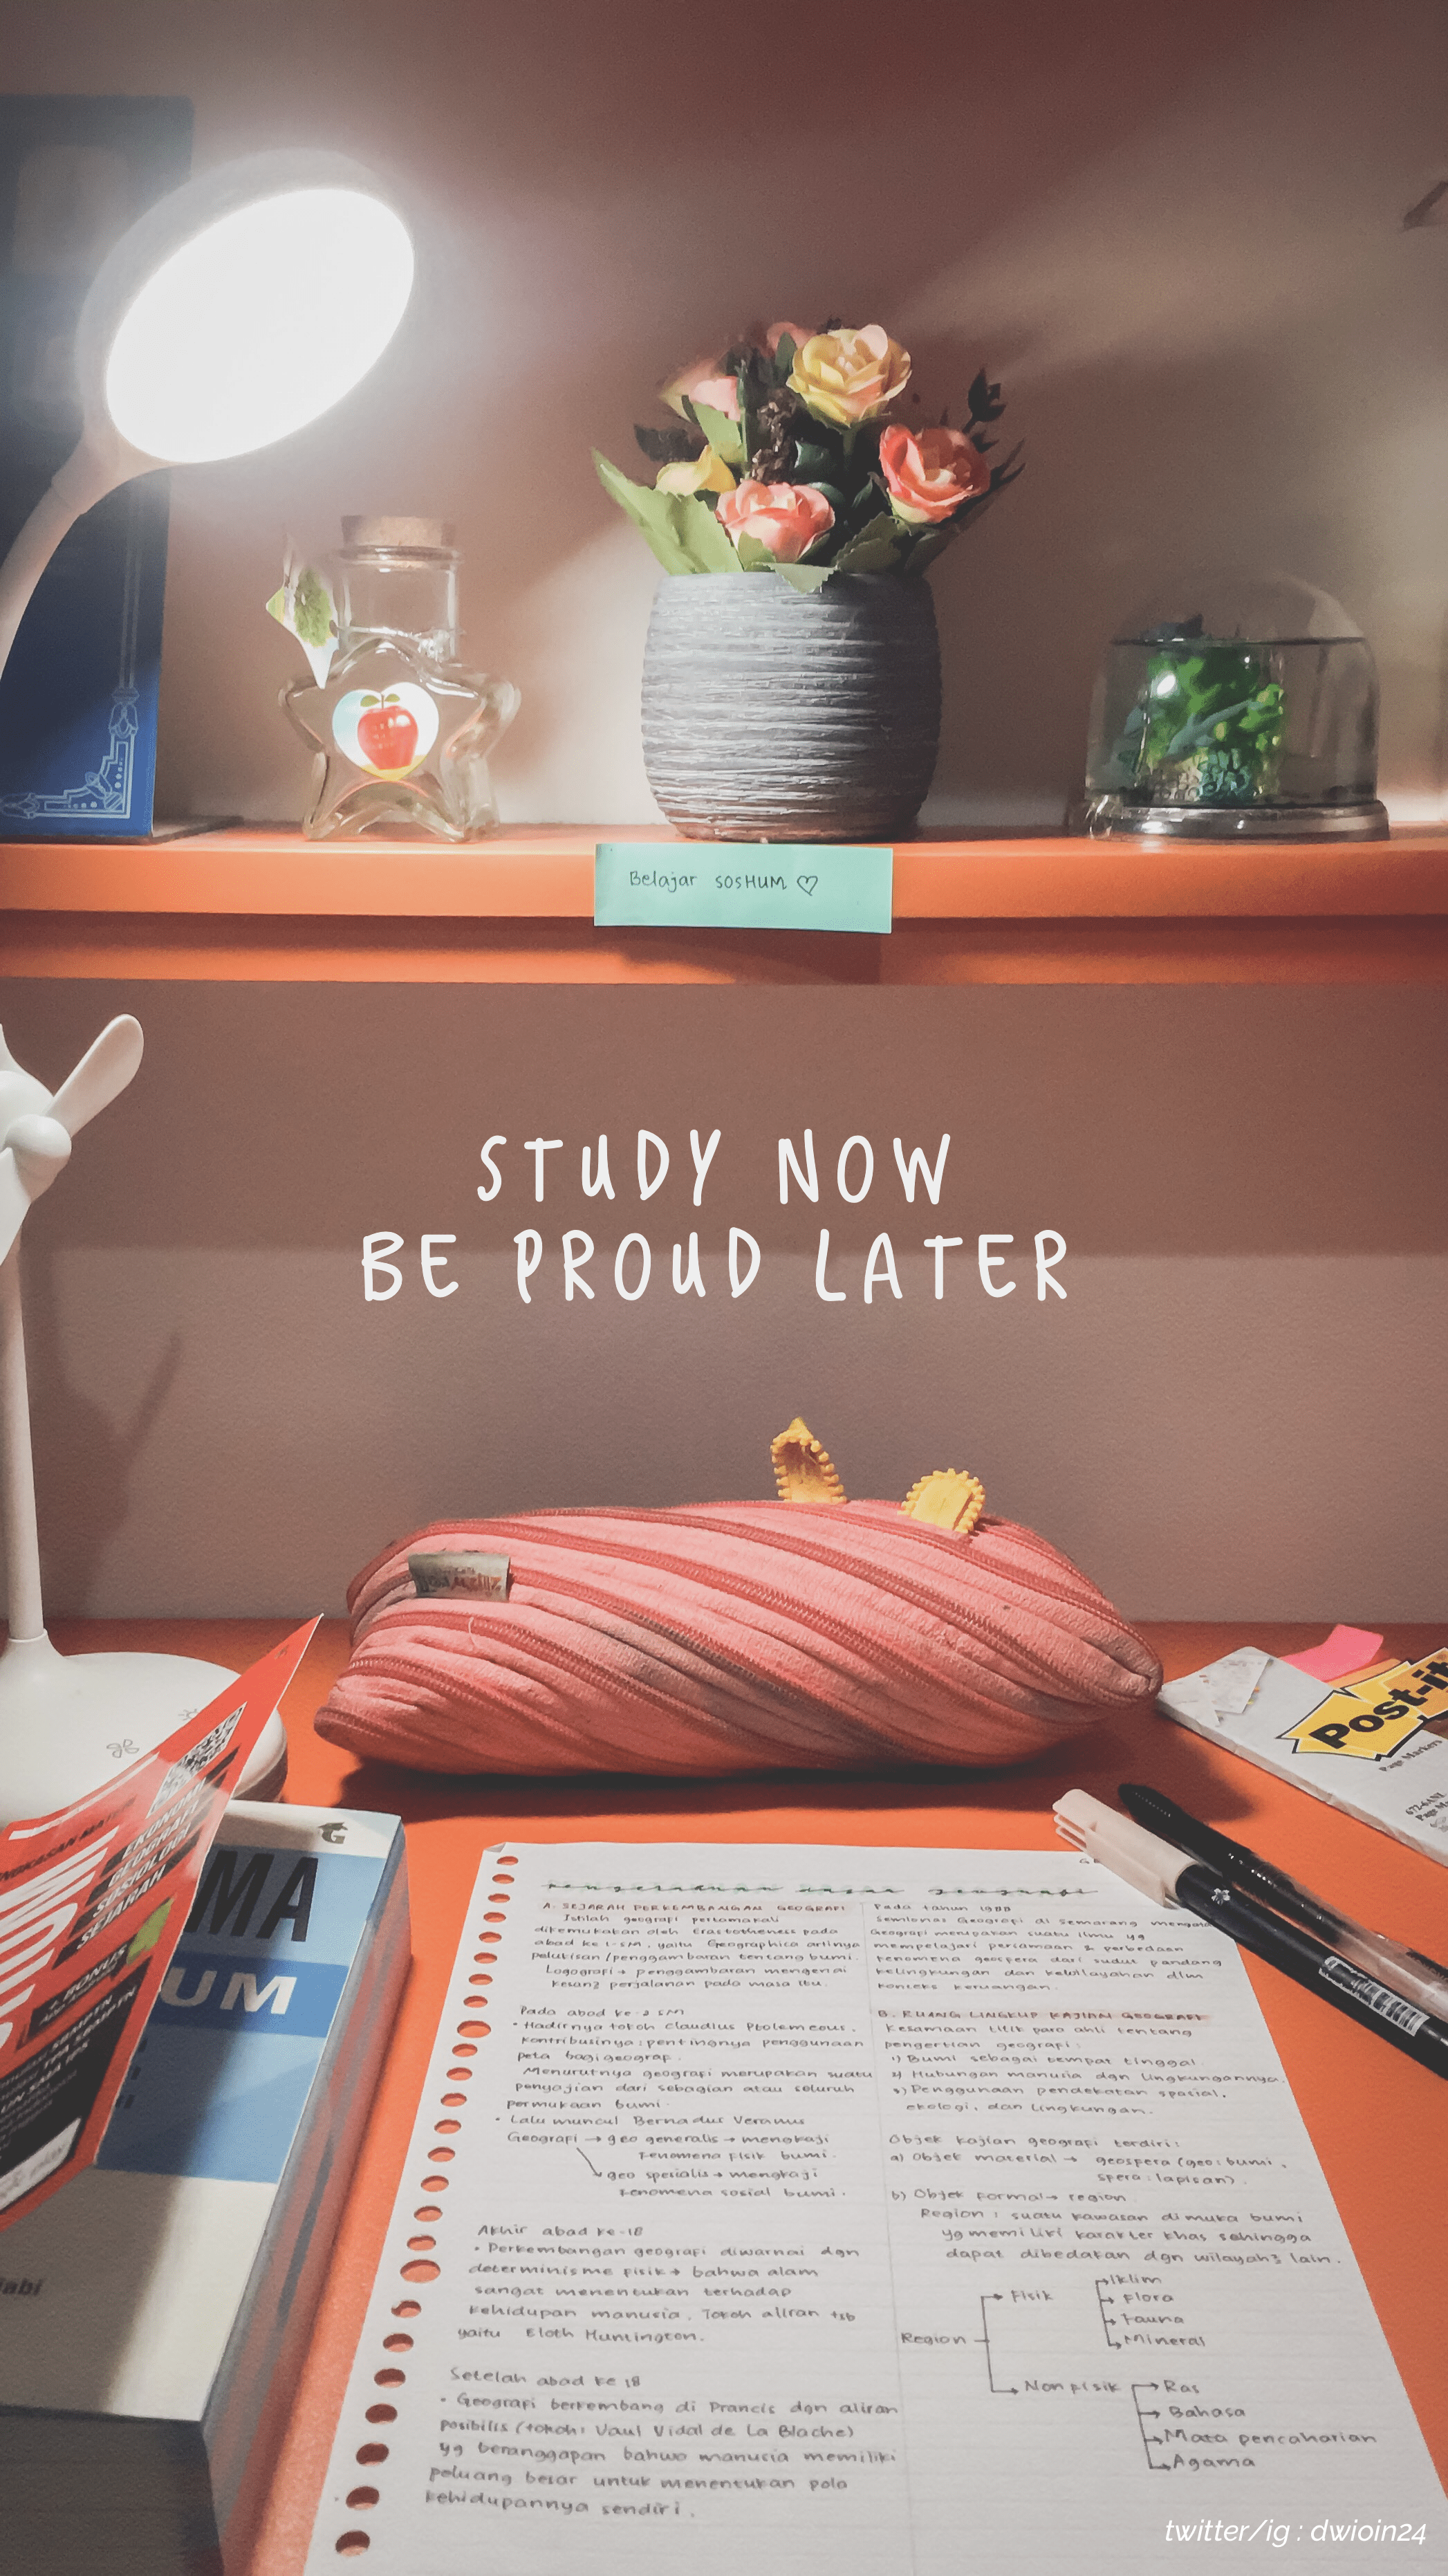 Study now be proud later - Study